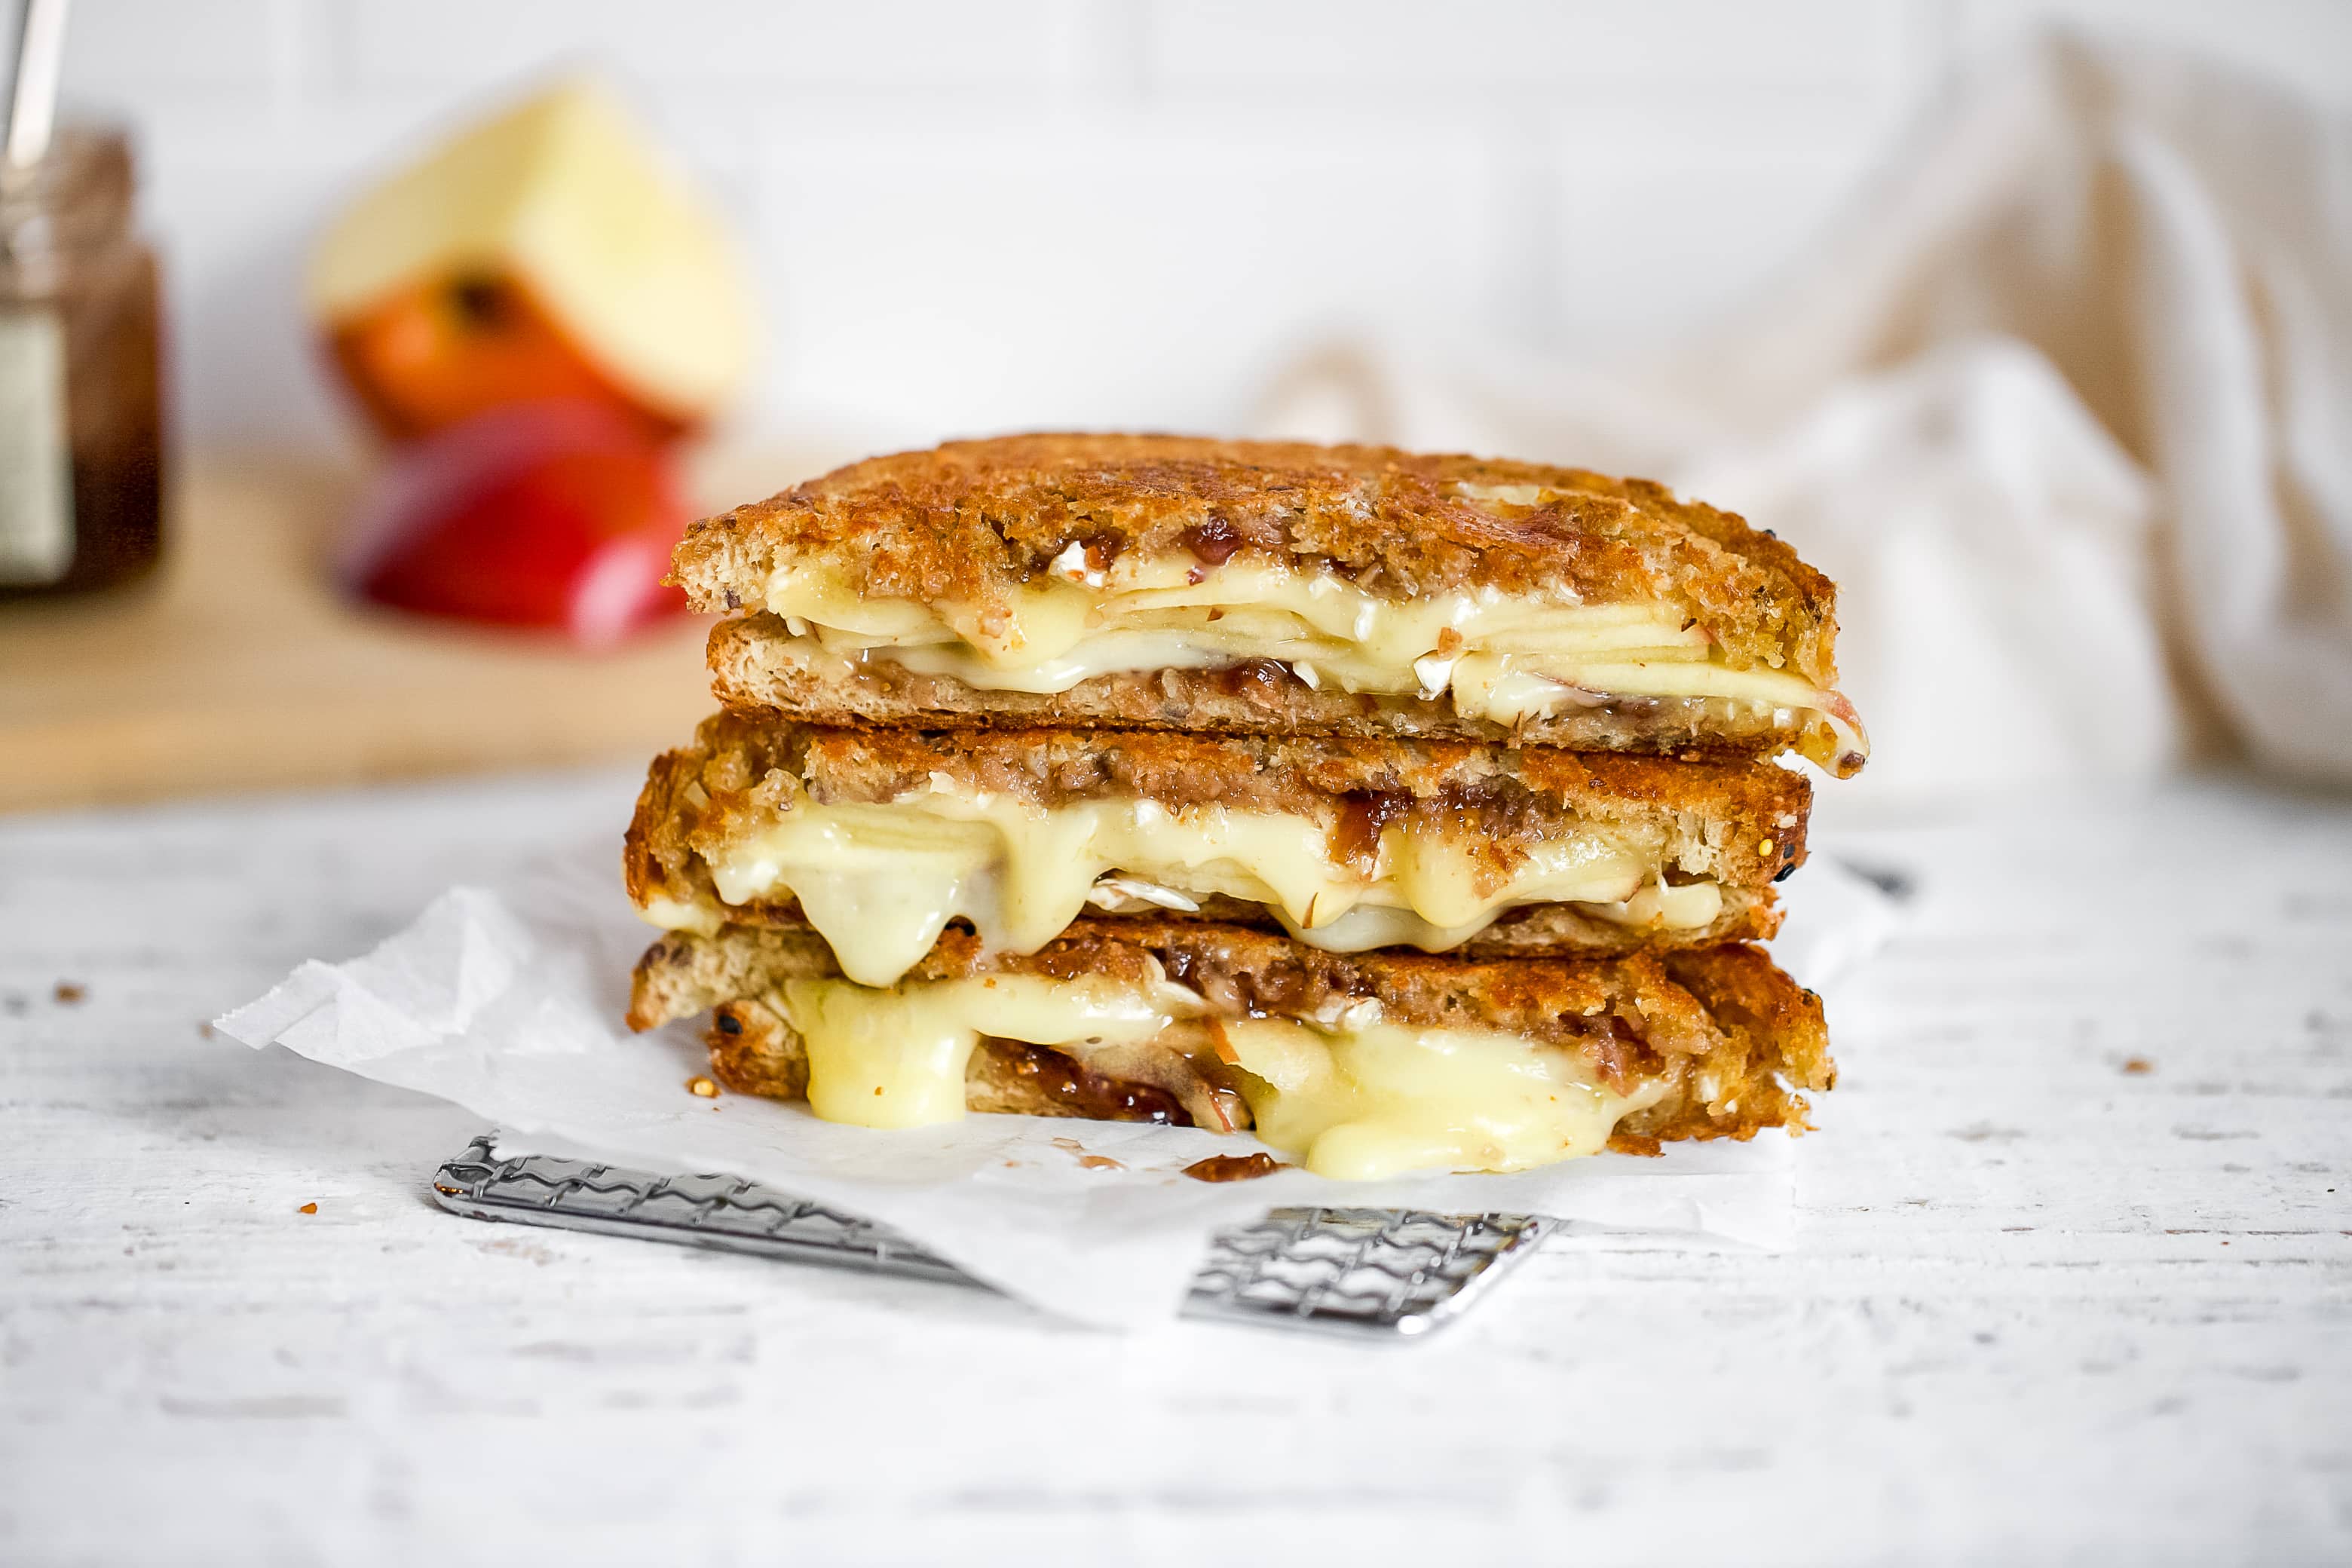 20 Meals Your Postnatal Clients Will Love: Apple & Brie Grilled Cheese Sandwich